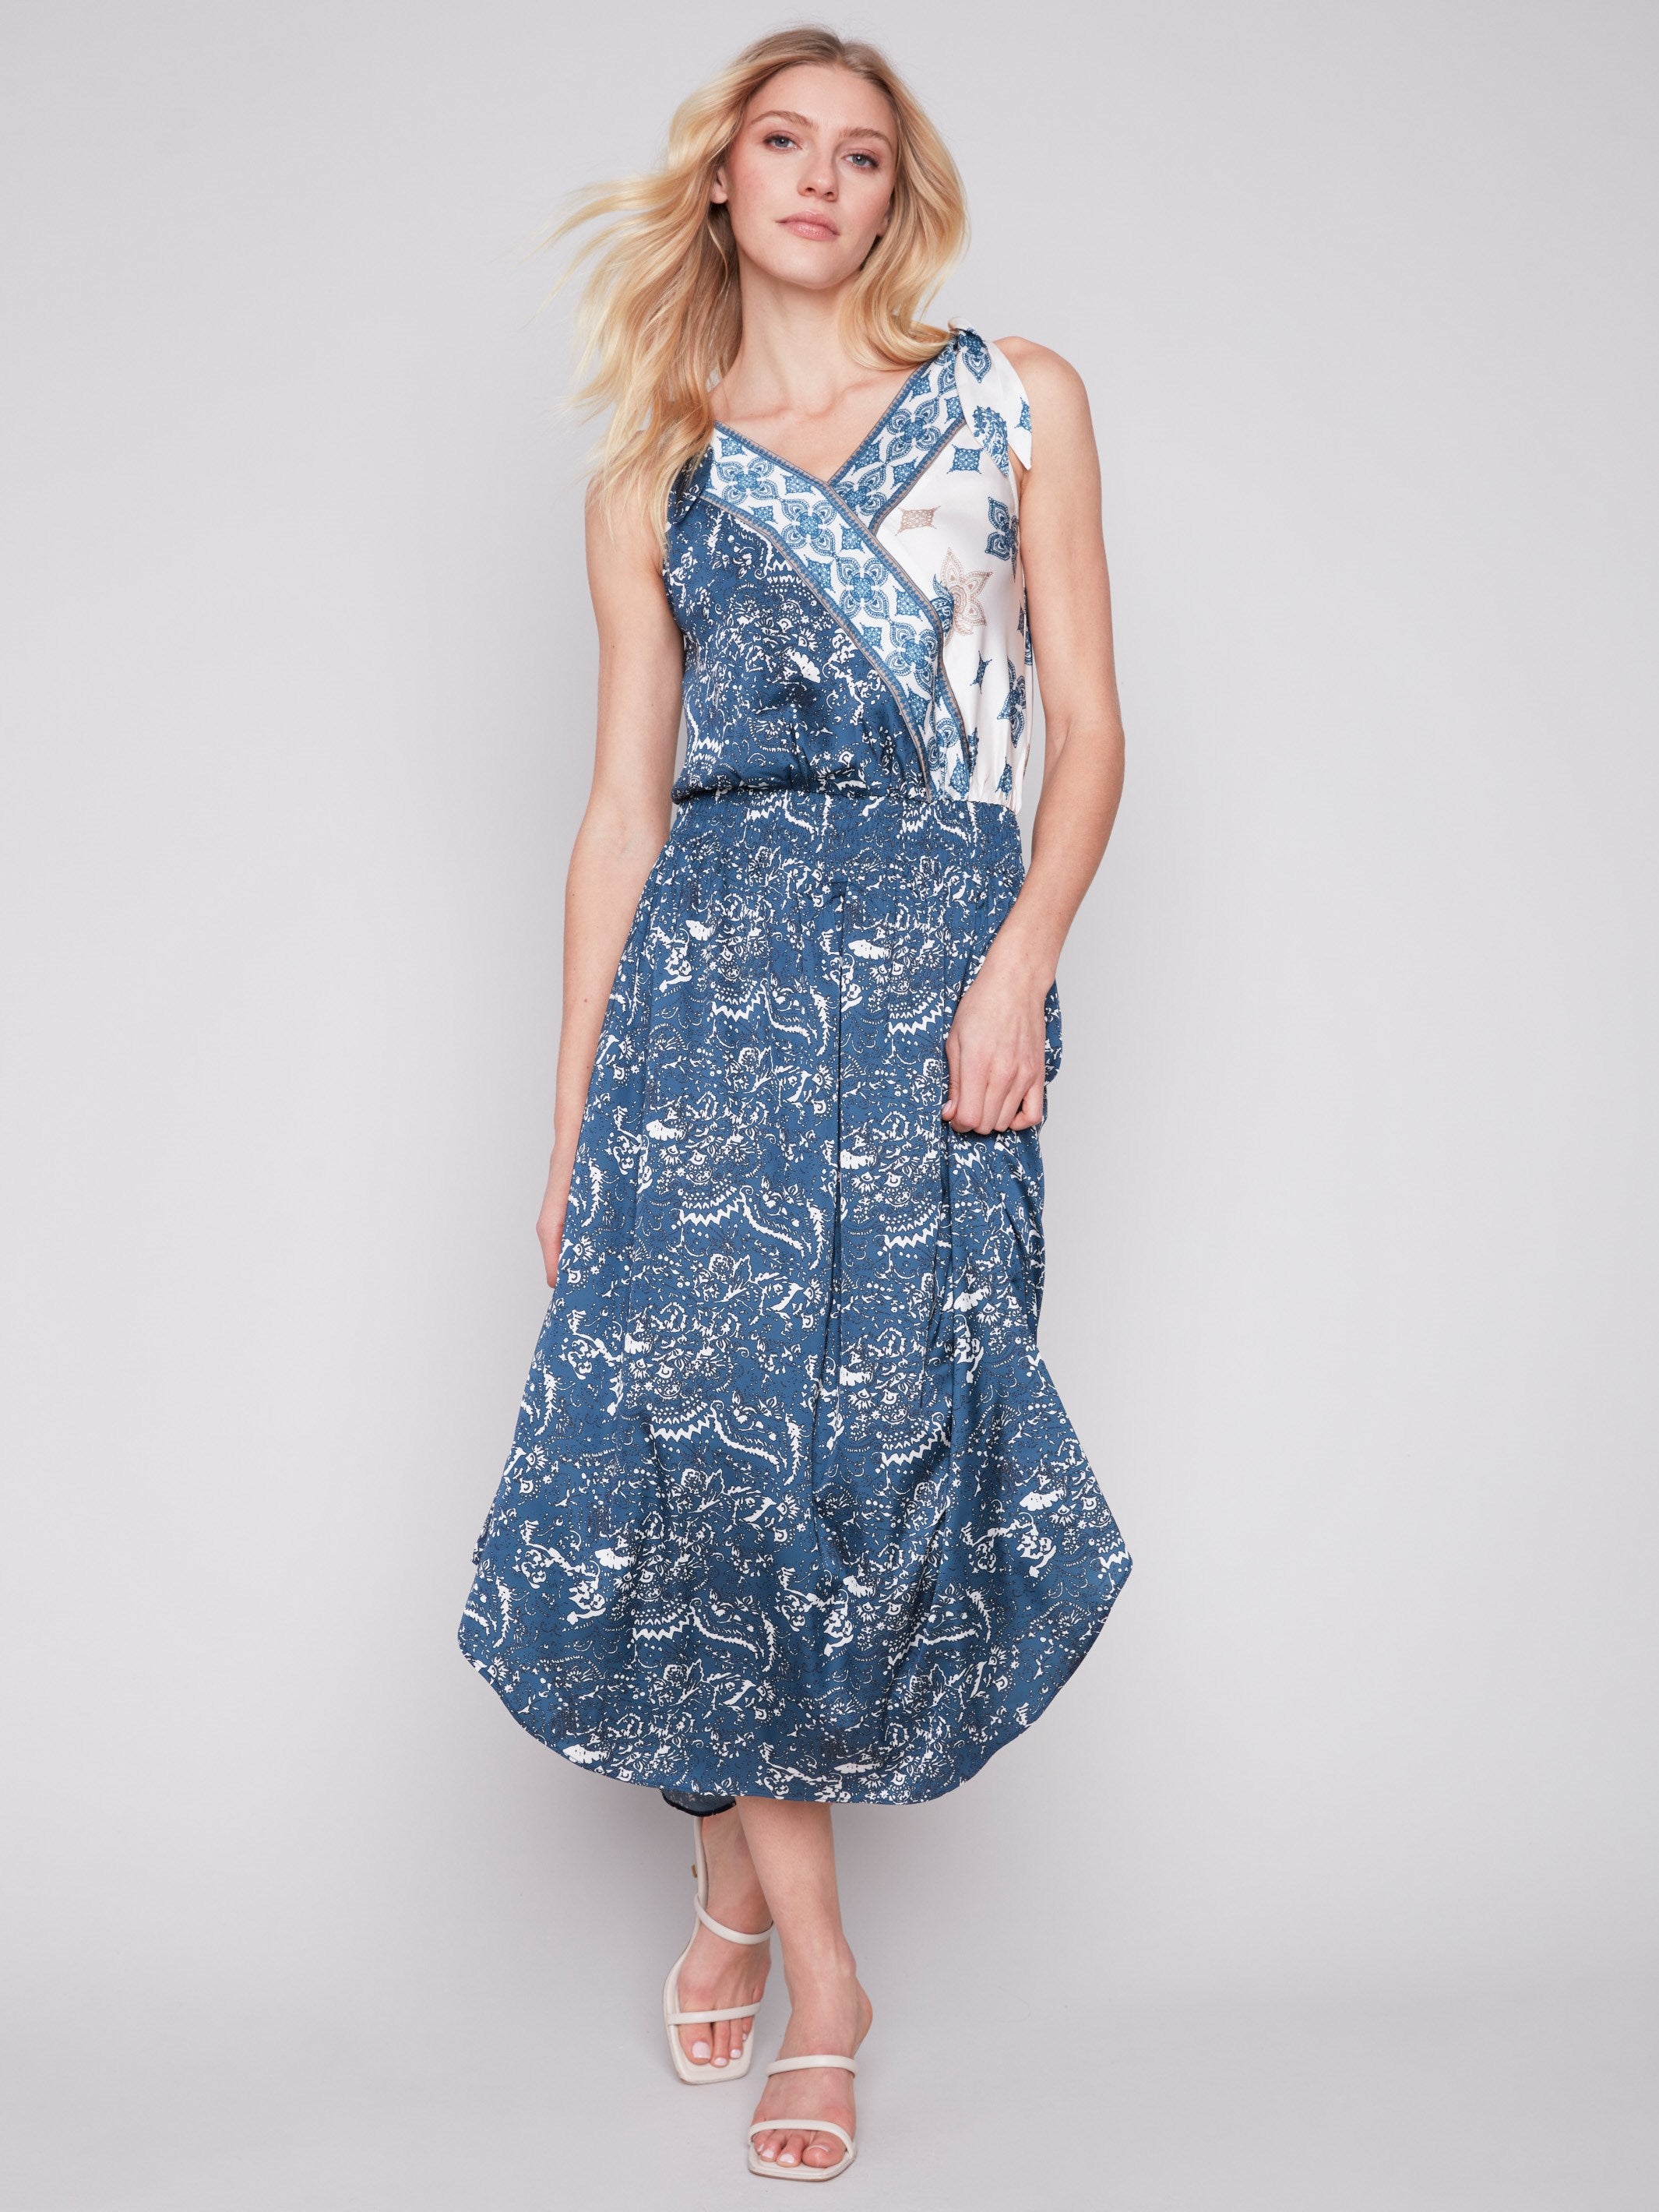 Printed Front Overlap Satin Dress - Paisley - Charlie B Collection Canada - Image 1